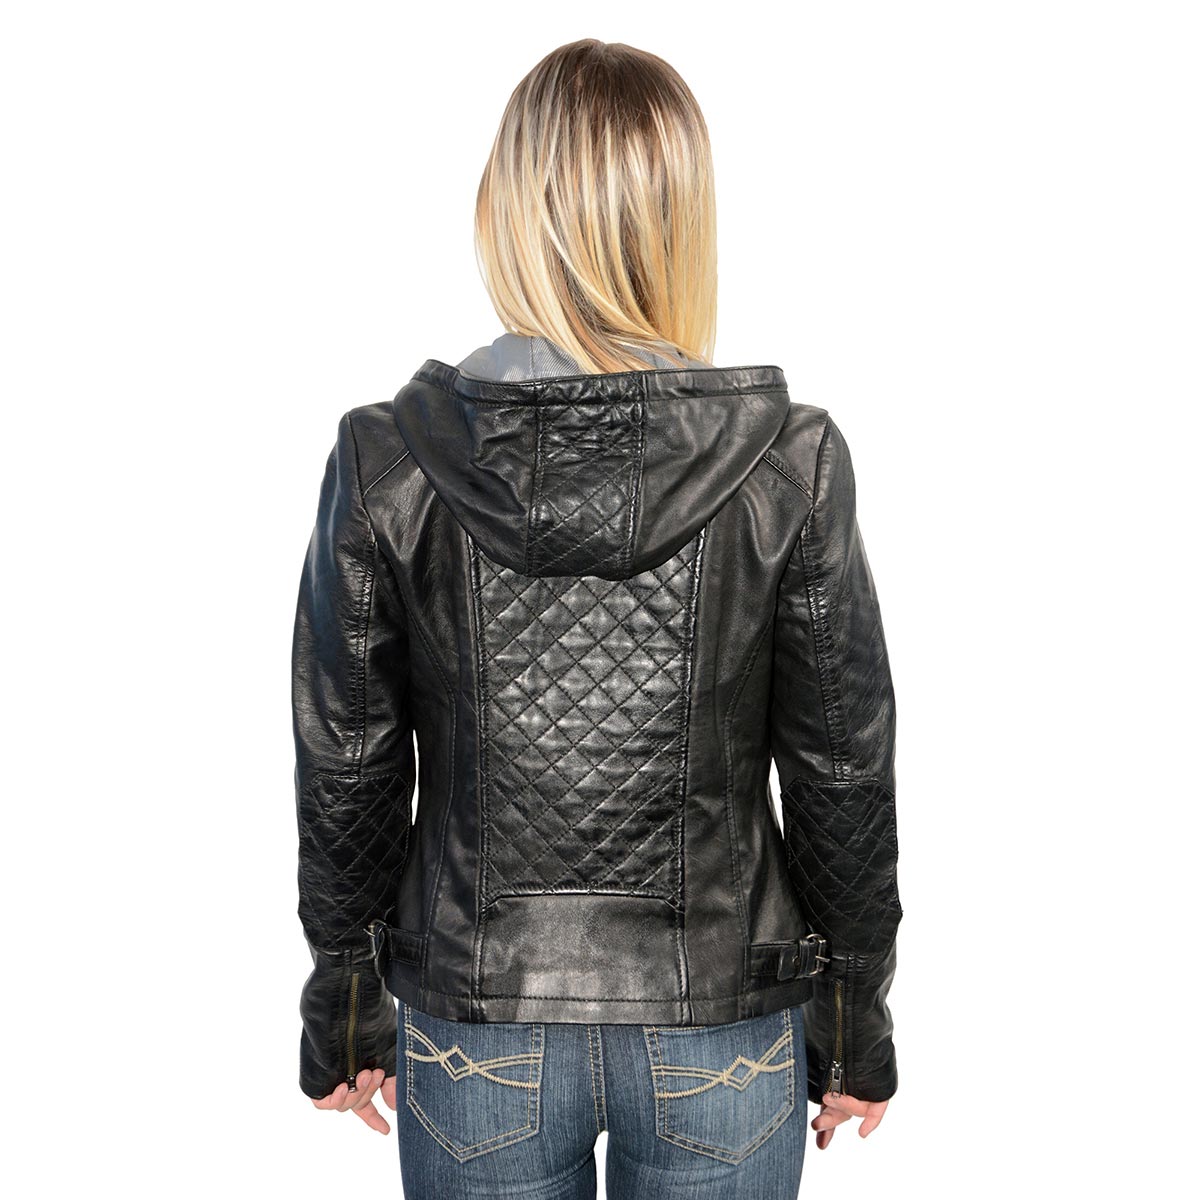 Milwaukee Leather SFL2810 Women's Black Scuba Style Fashion Leather Jacket with Drawstring and Hoodie